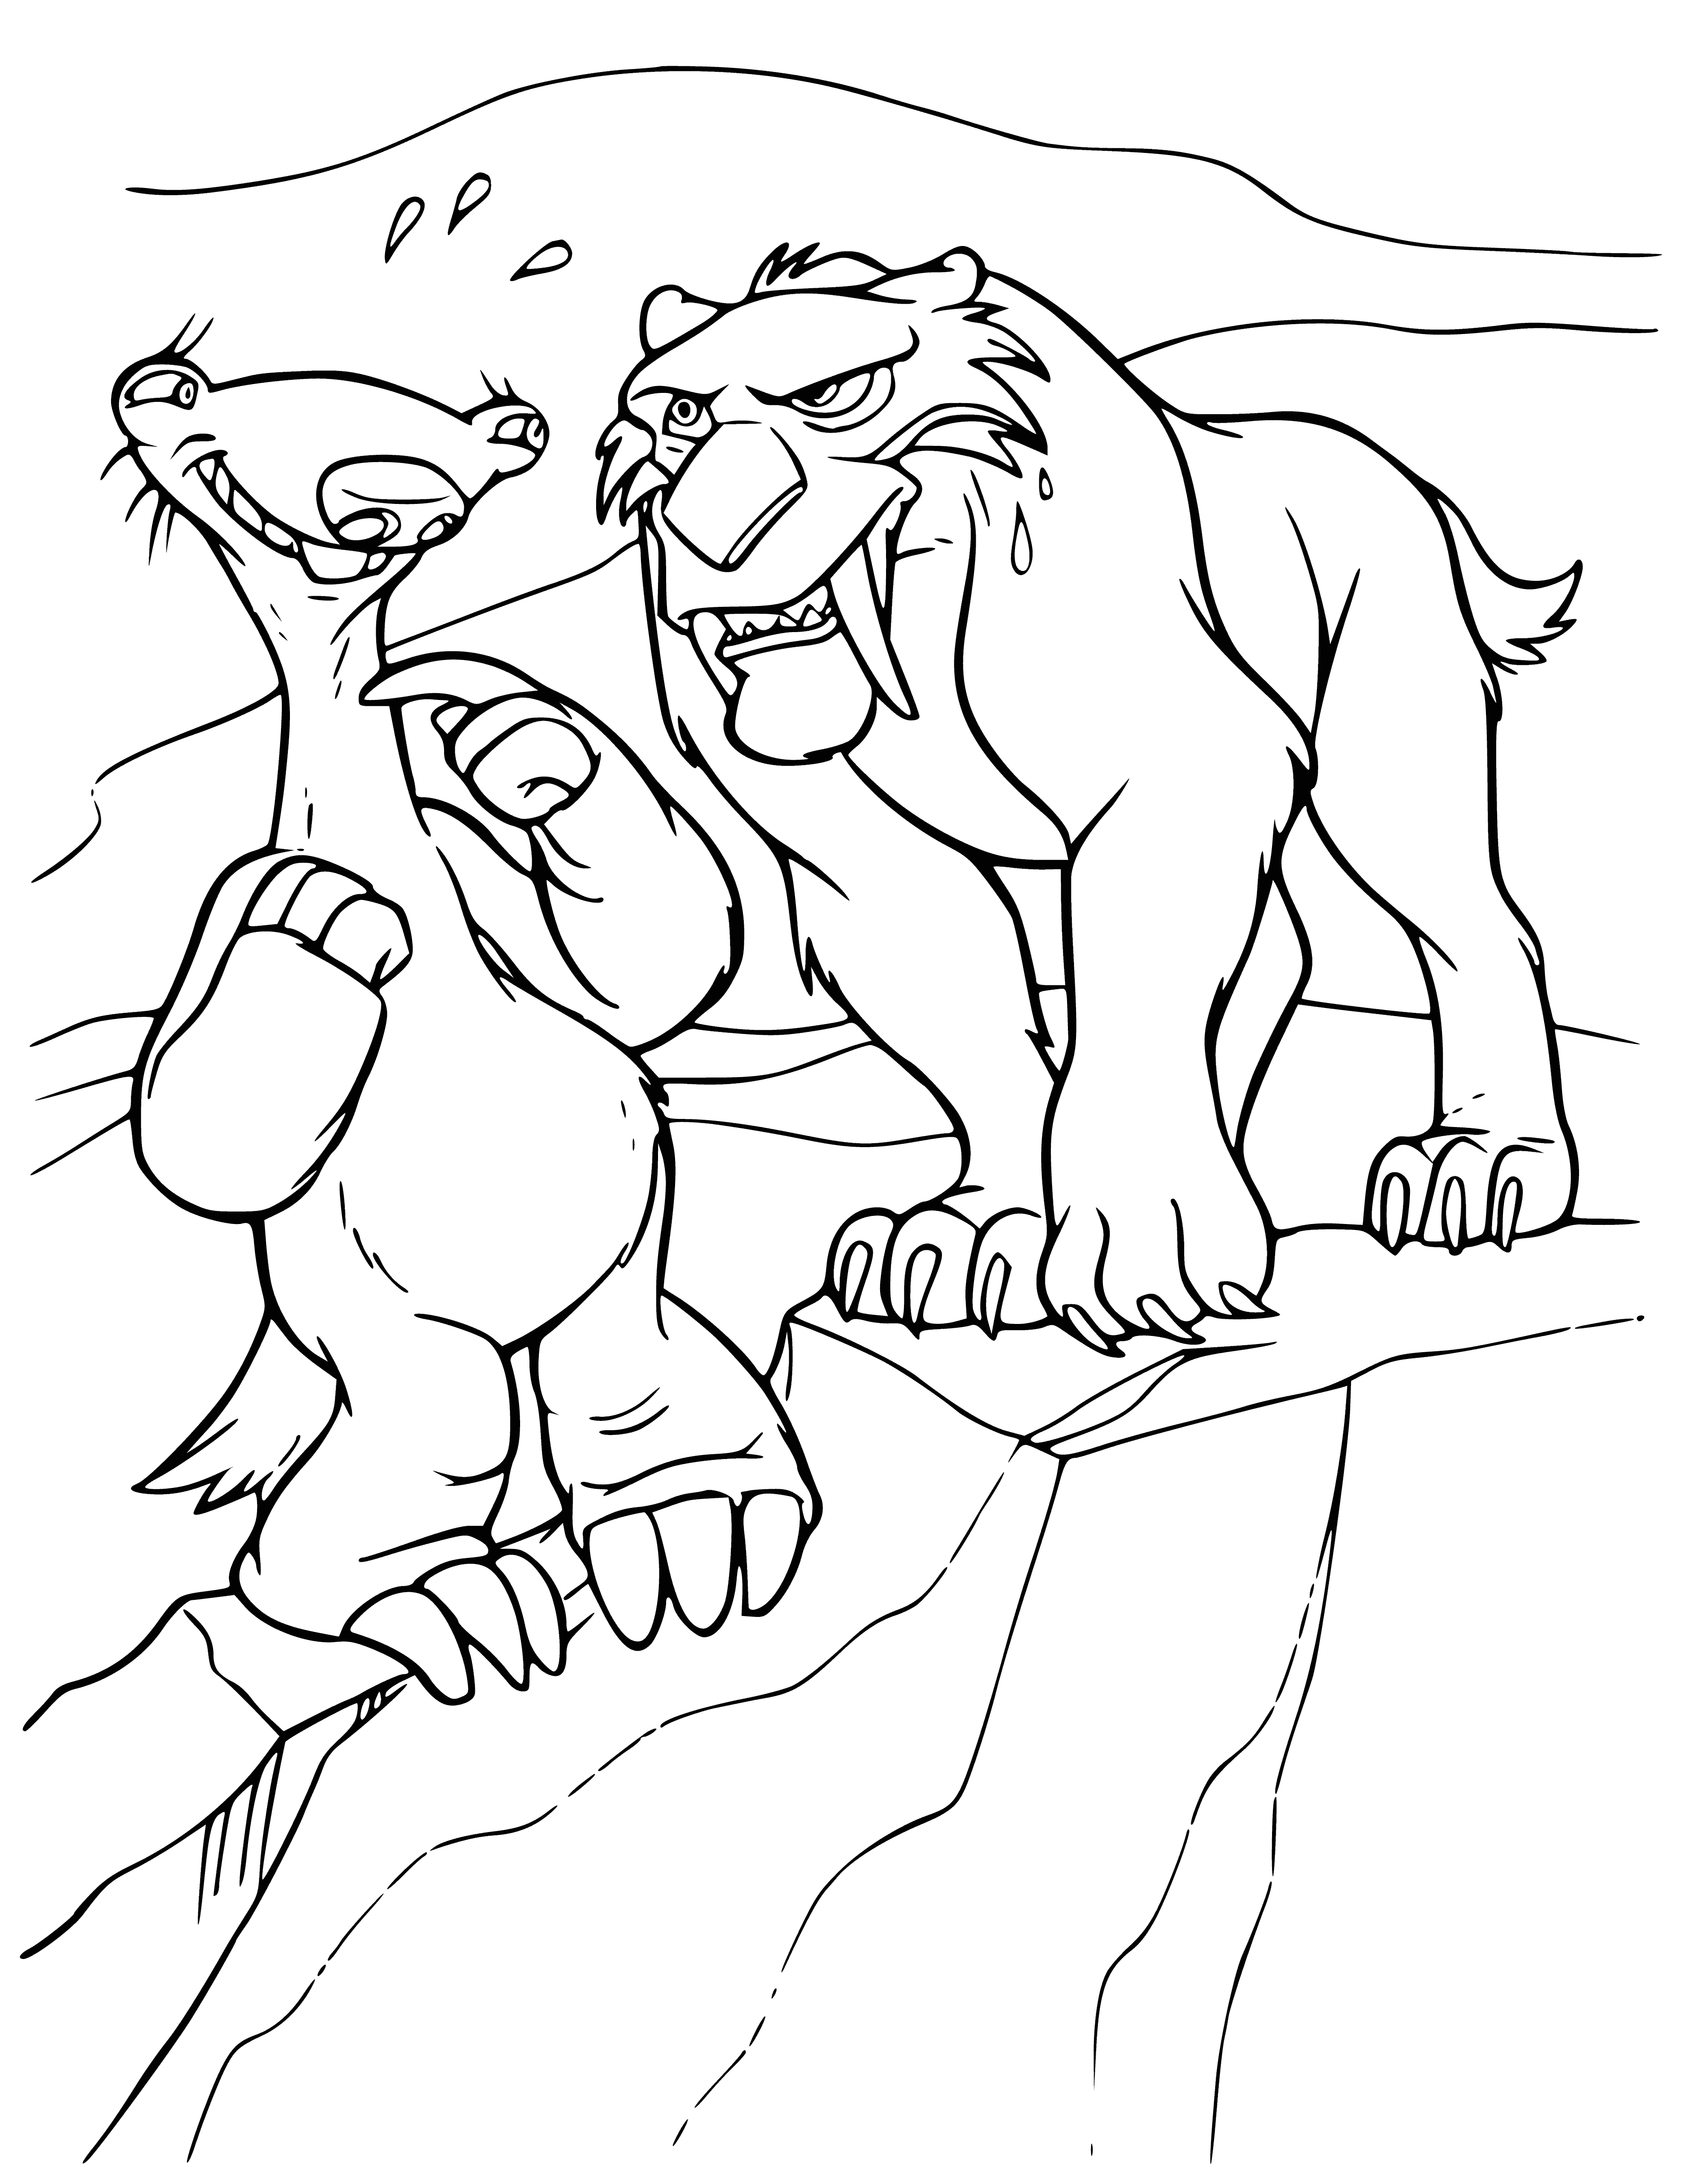 Sid and Diego coloring page